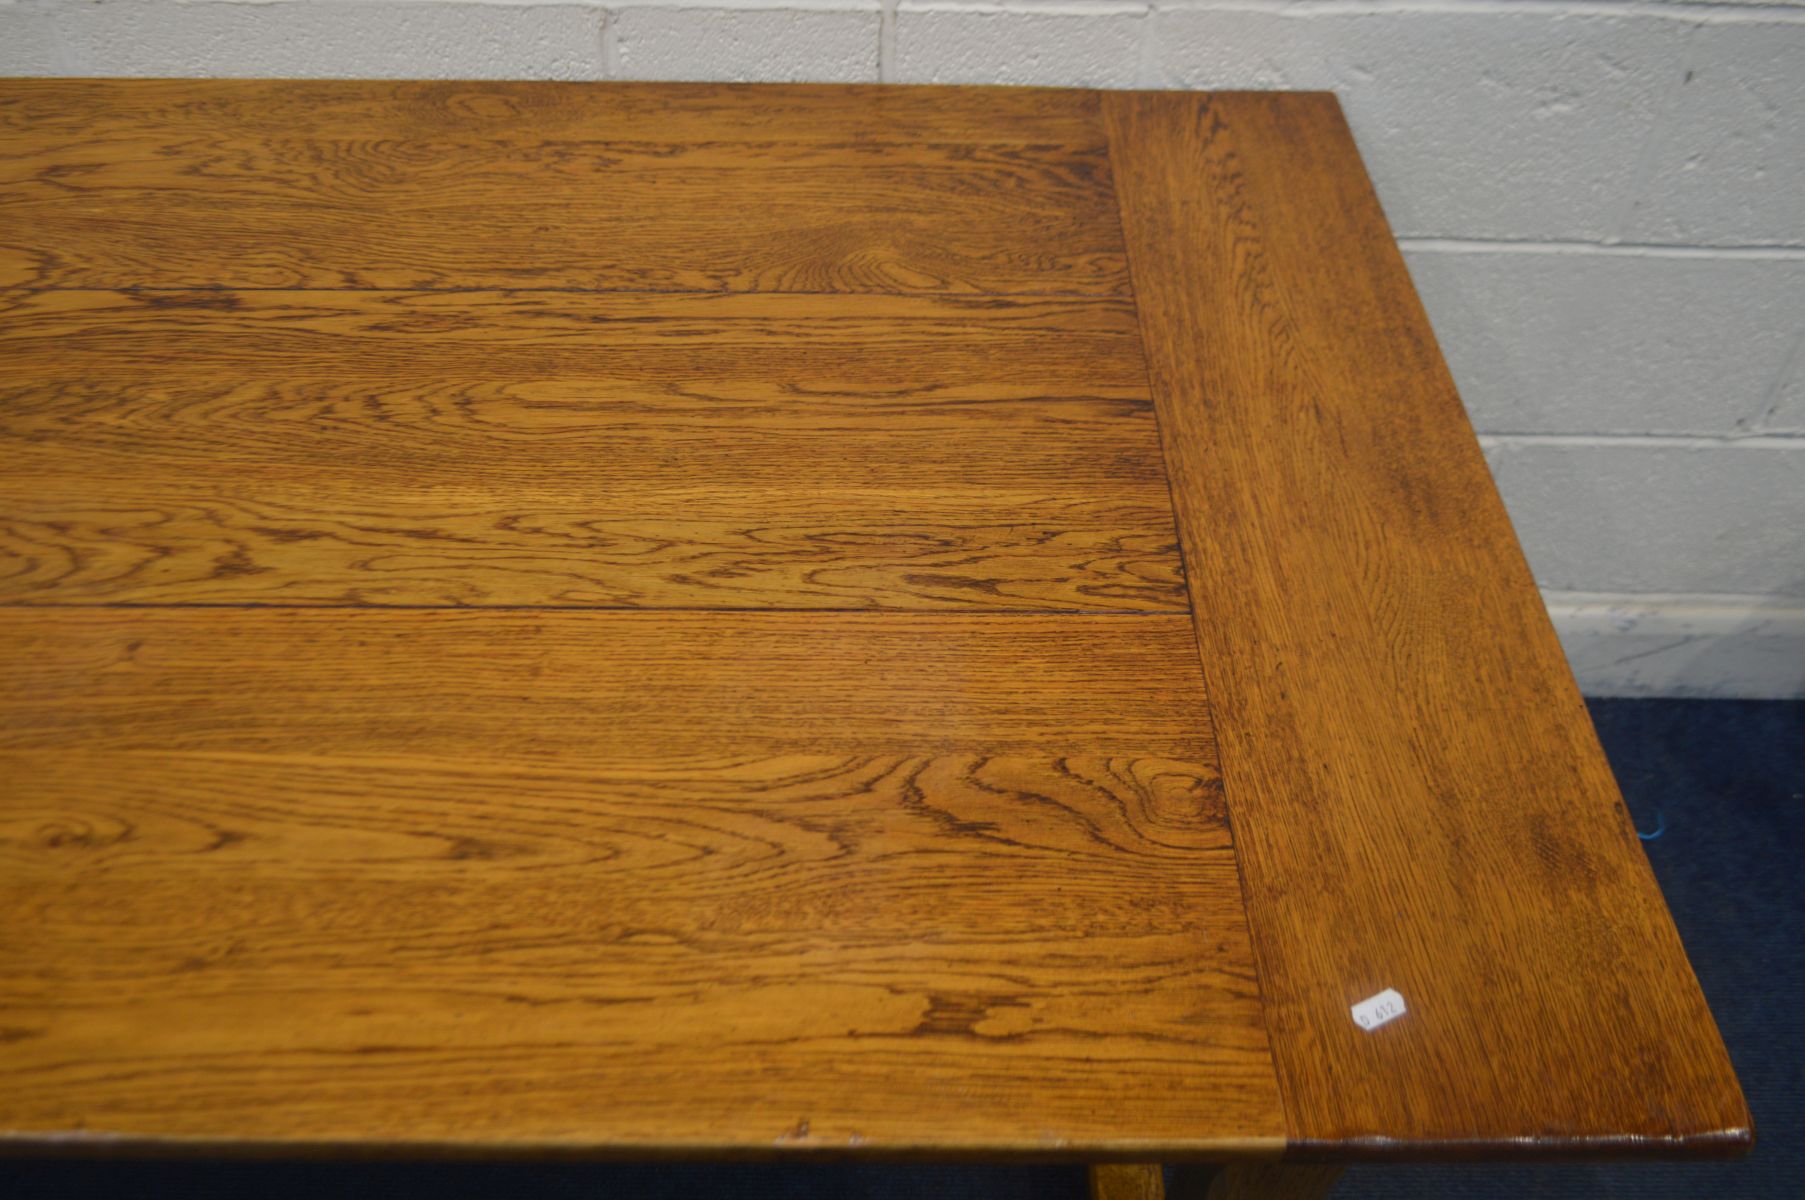 A REPRODUCTION OAK REFECTORY TABLE, in an 18th century style, plank top, on chamfered legs united by - Image 2 of 3